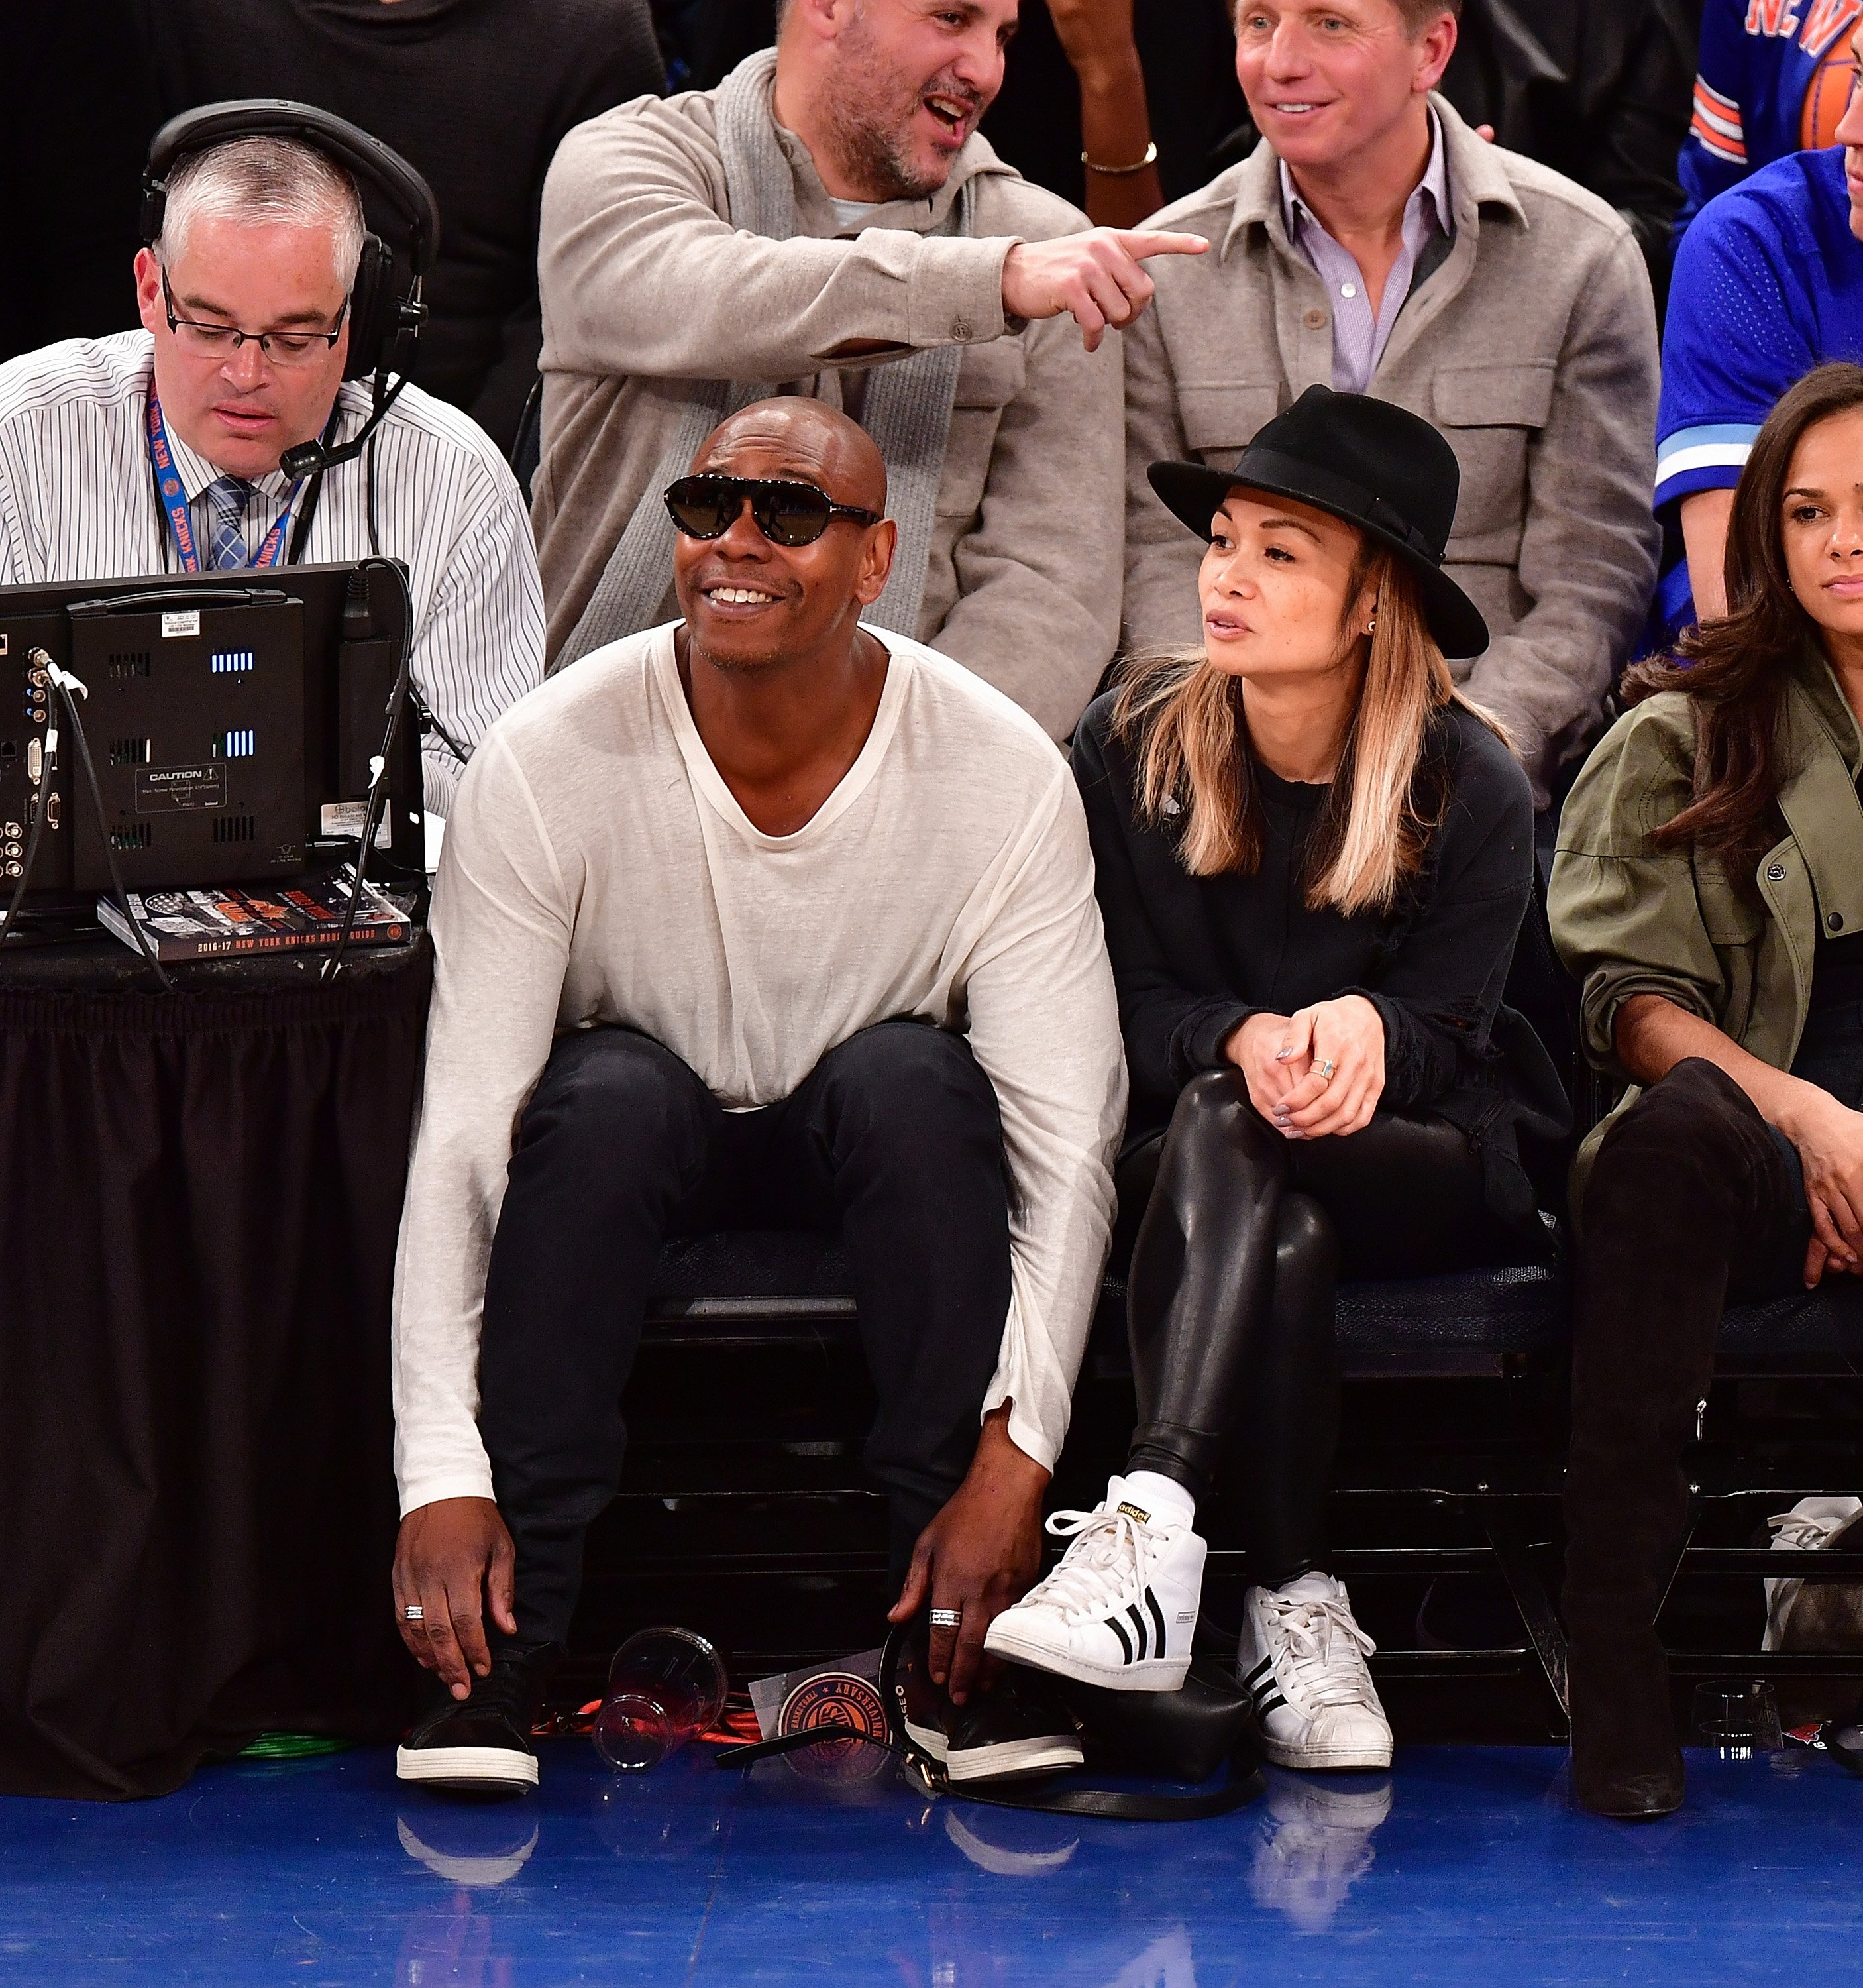 Dave and Elaine Chappelle at a basketball game in New York |  Source: Getty Images 